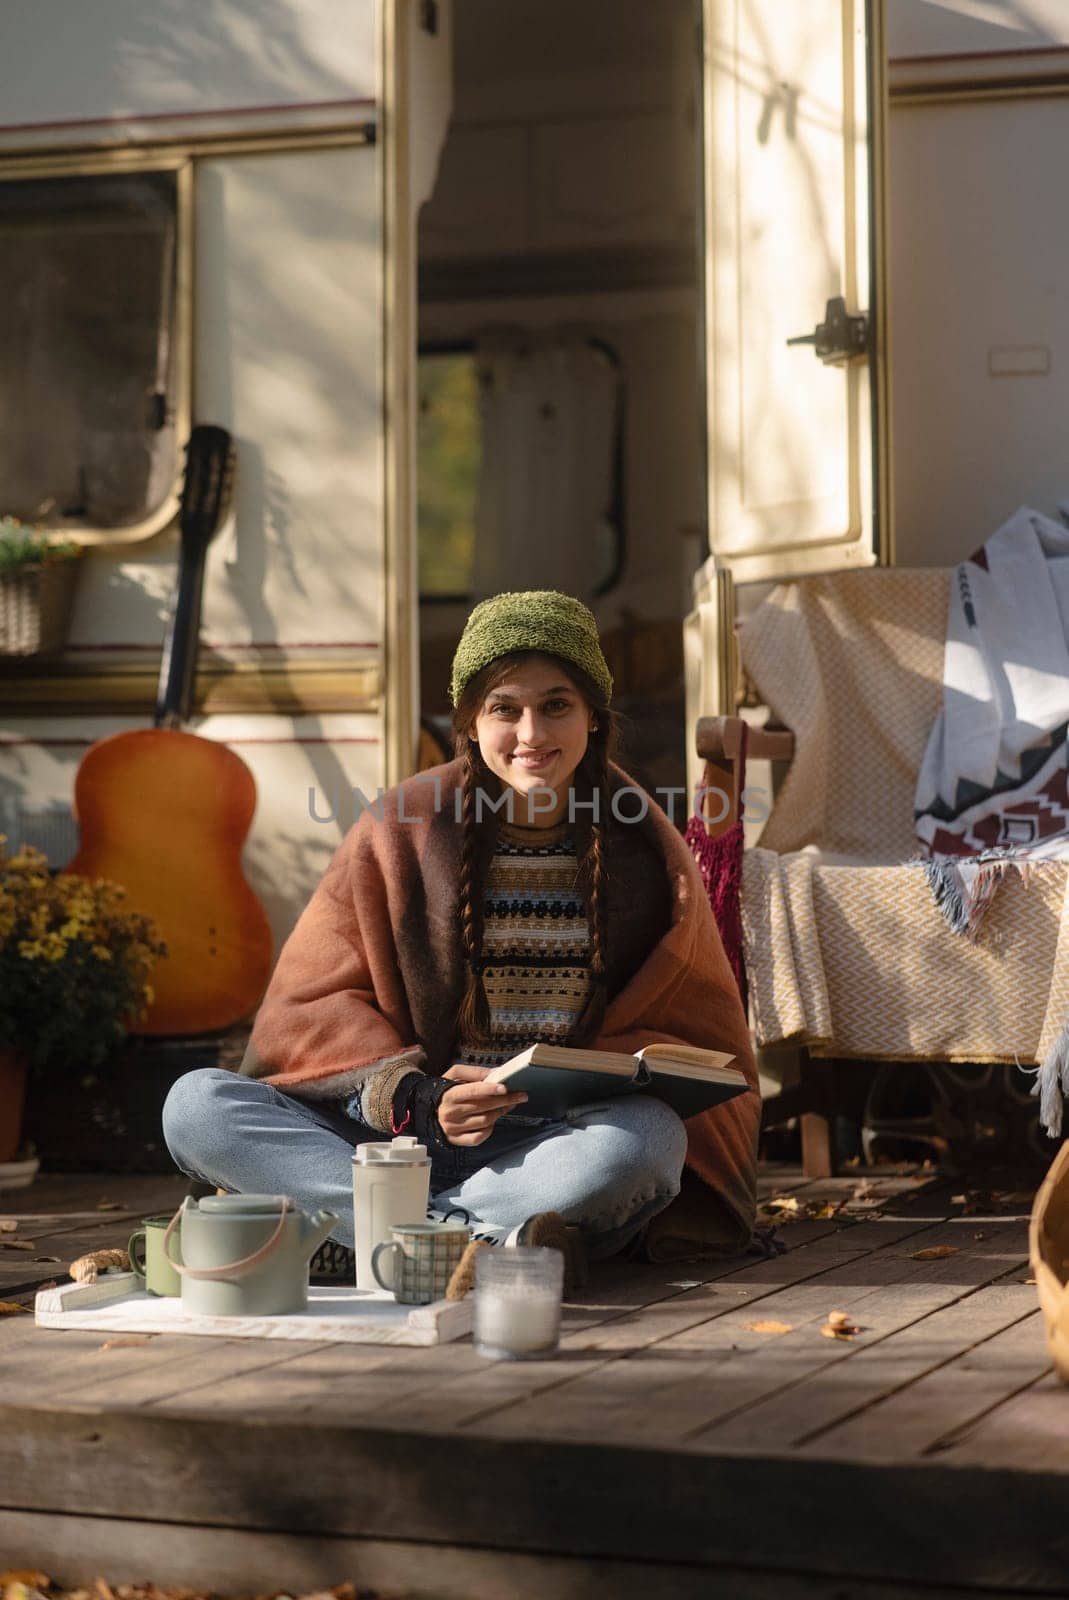 A chic, modern hippie woman indulges in a warm beverage on the terrace, exuding style. High quality photo